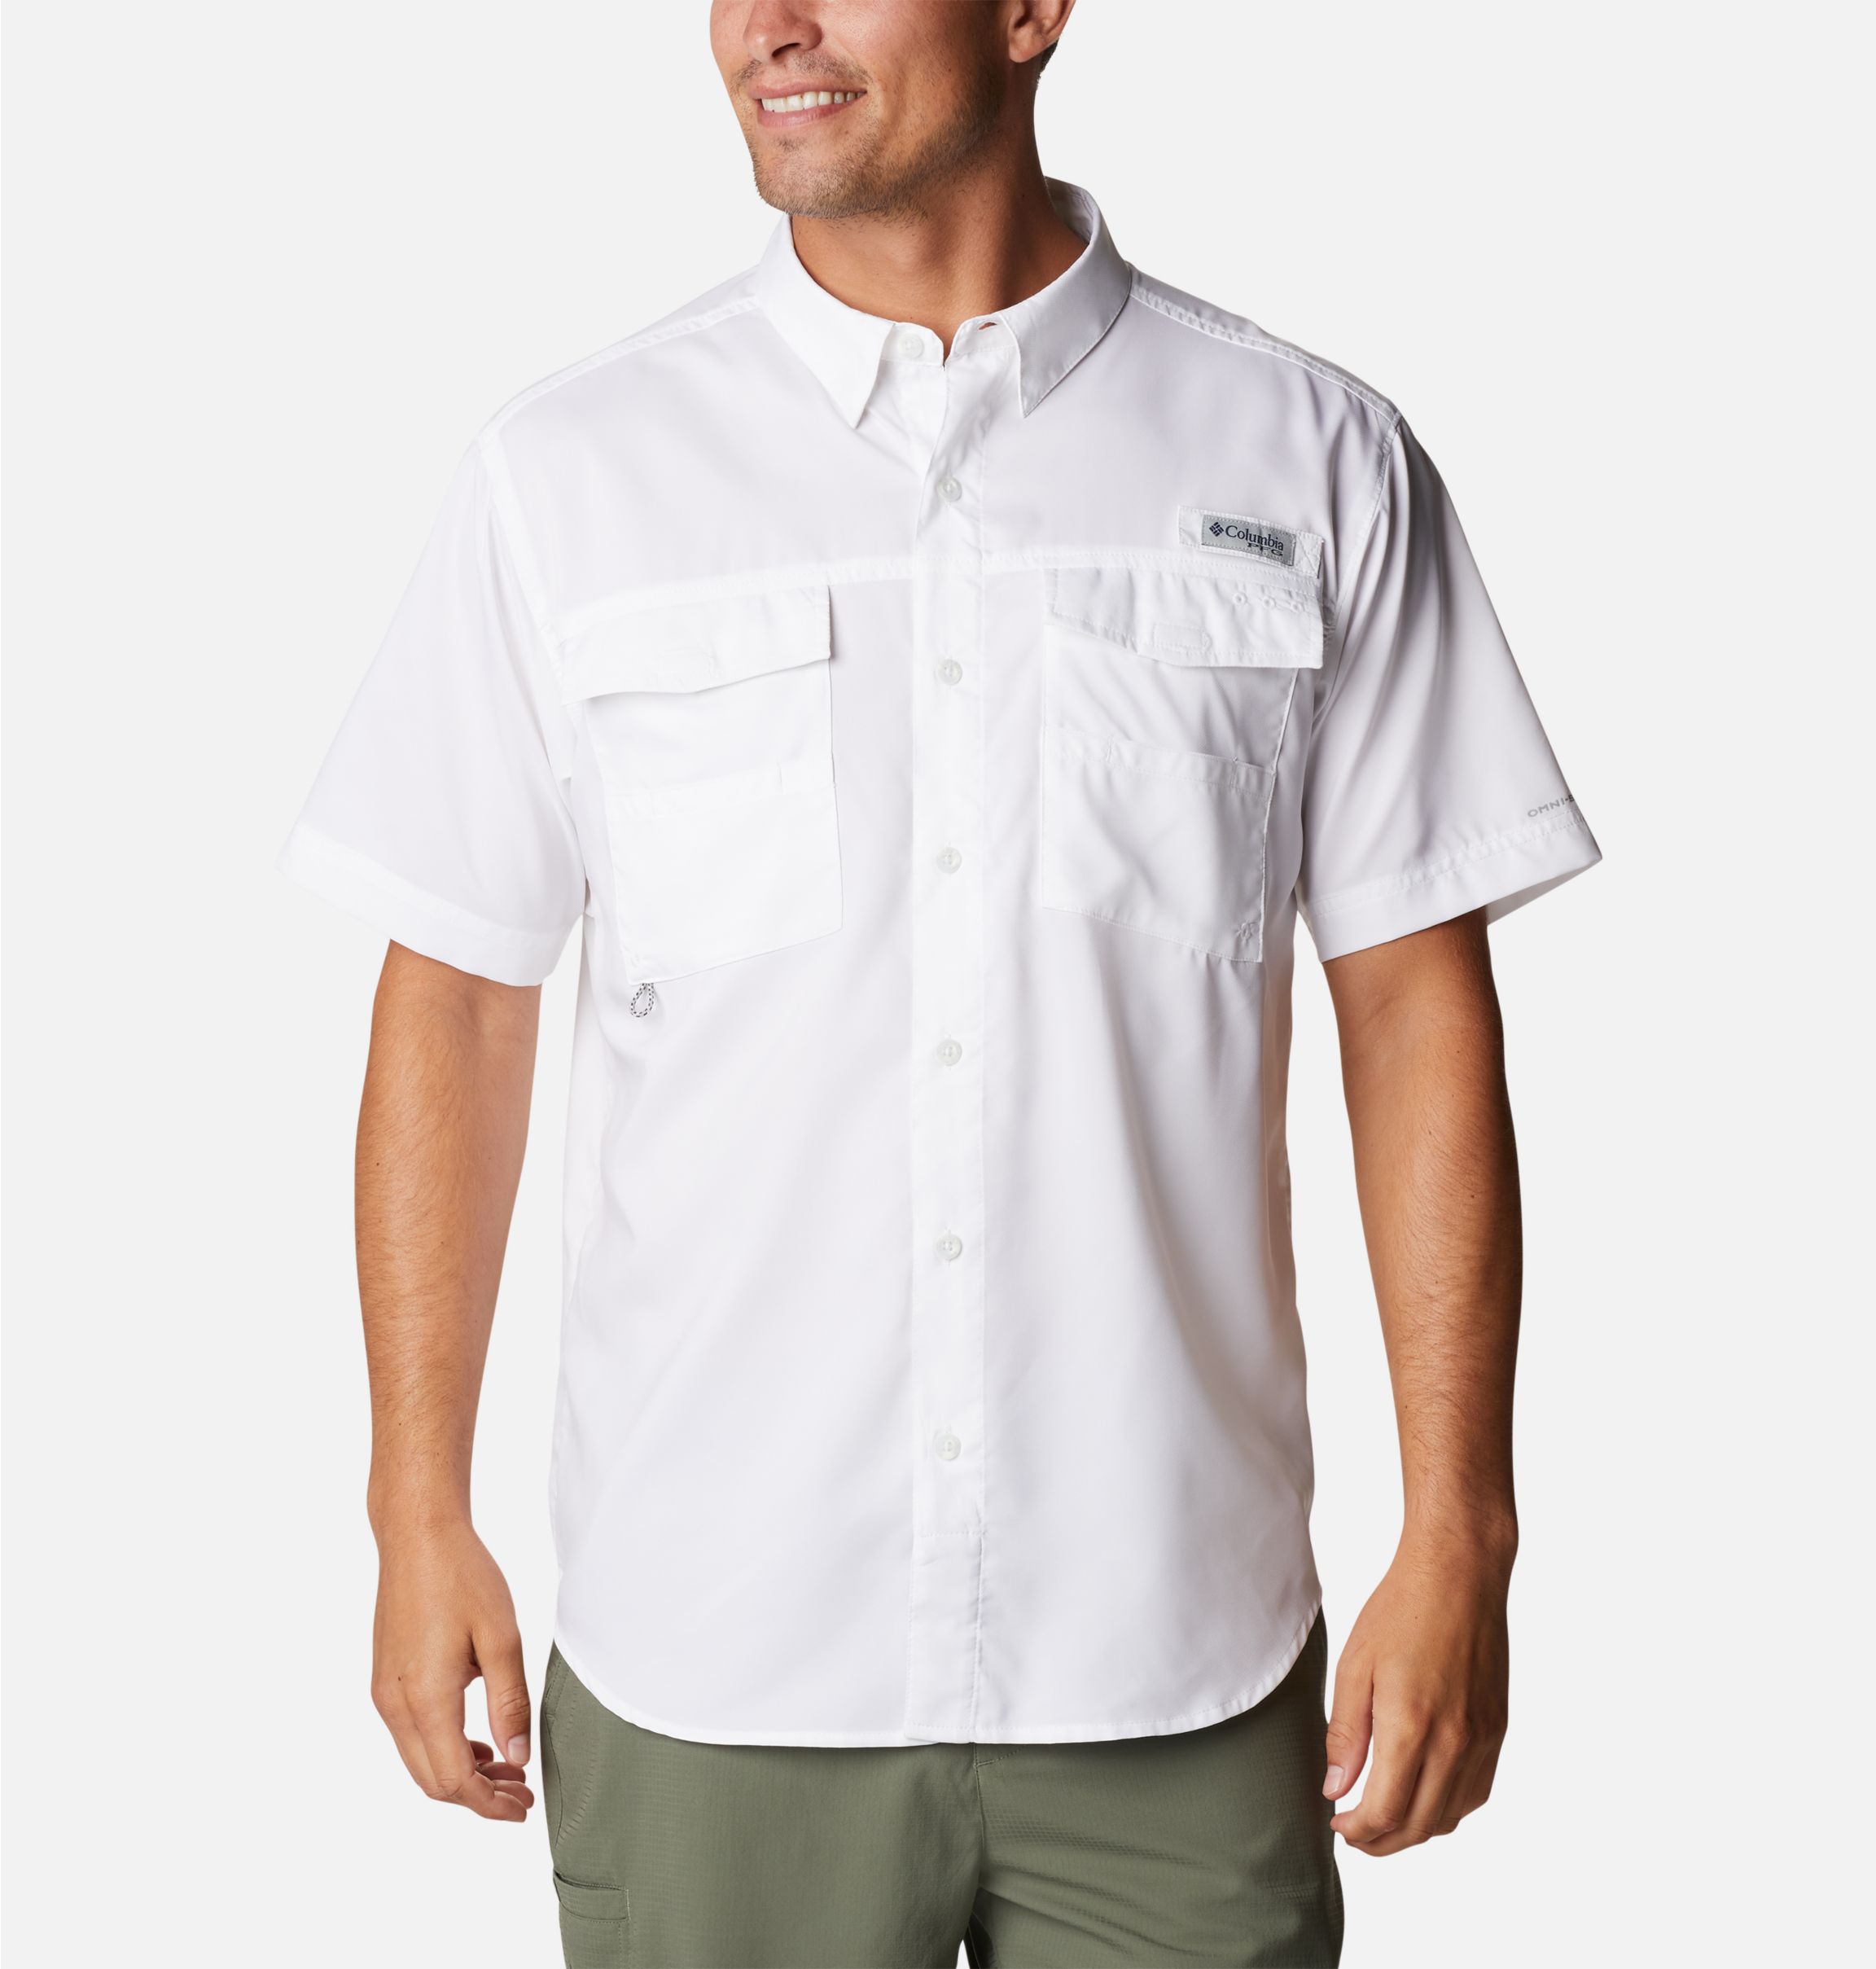 Columbia Men's Blood and Guts IV Woven Short Sleeve